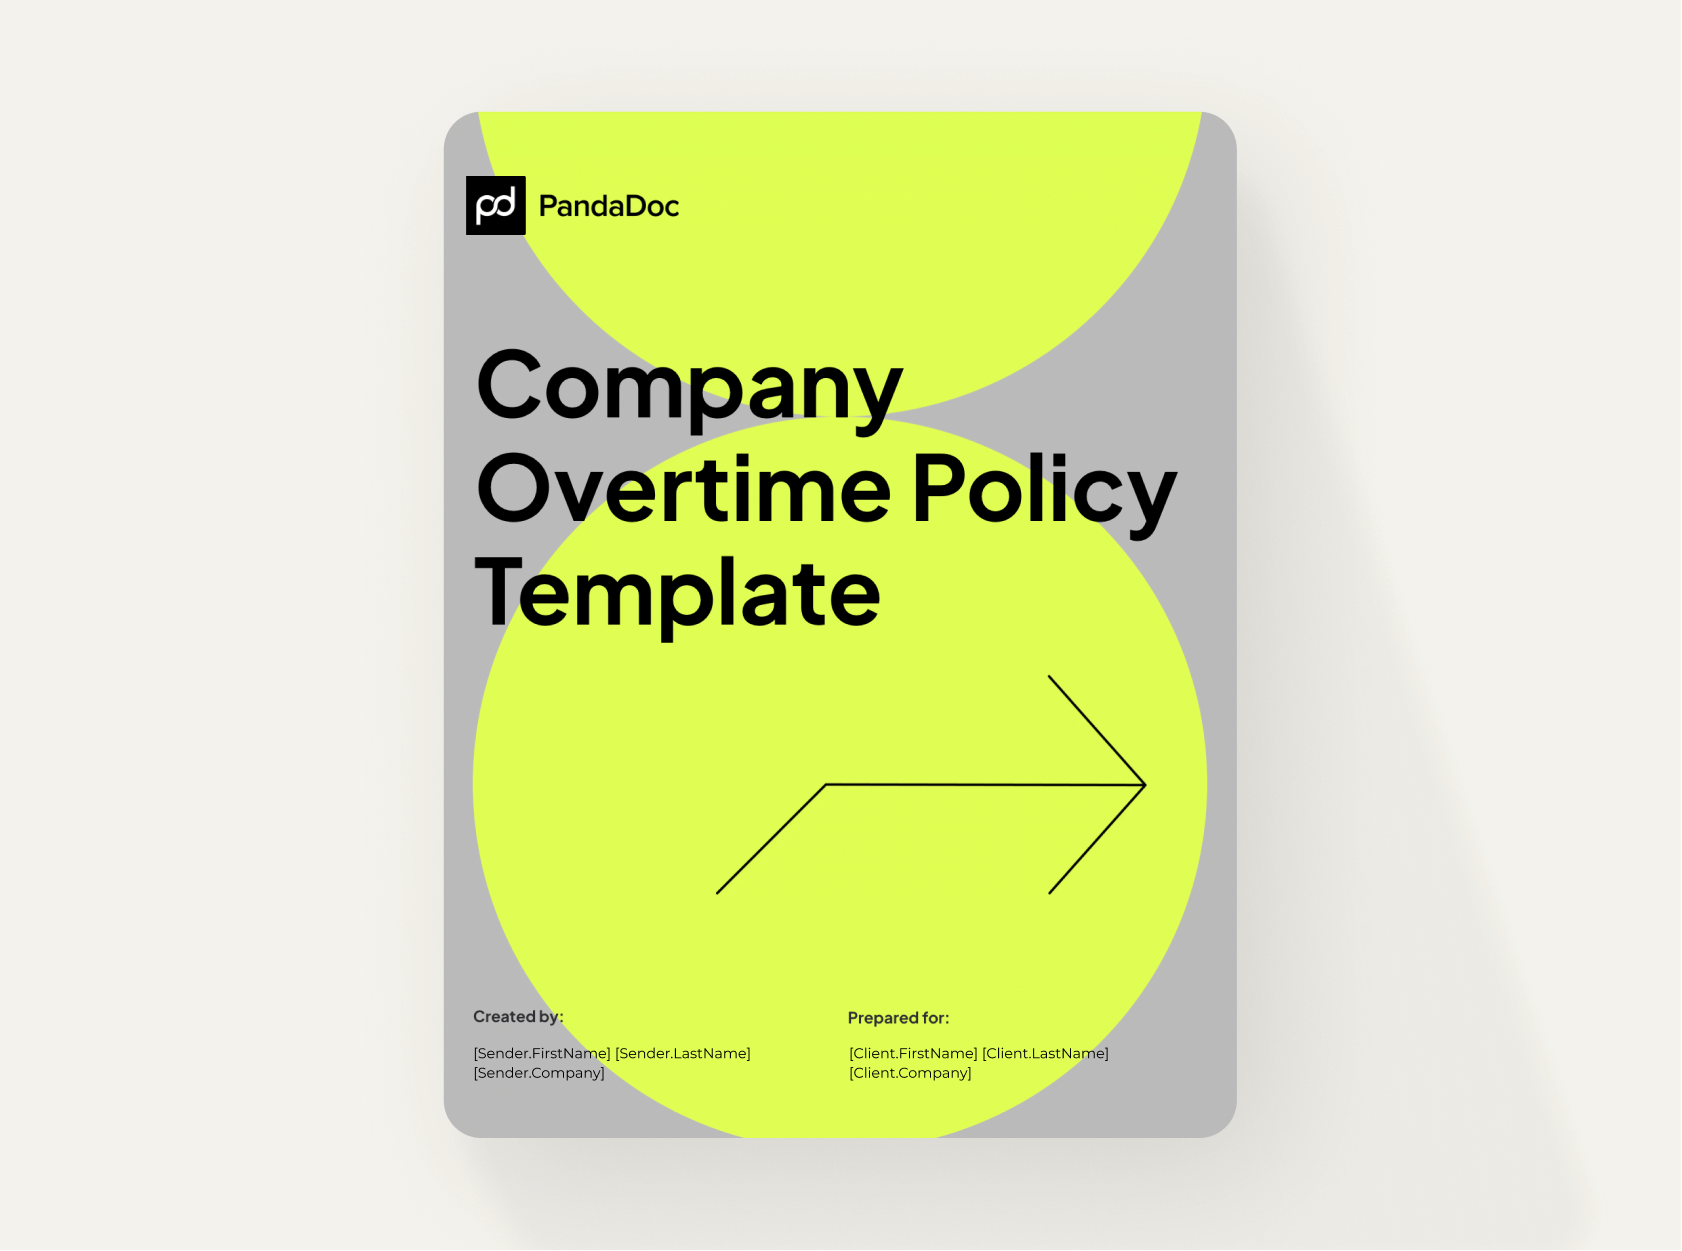 Company Overtime Policy Template PandaDoc